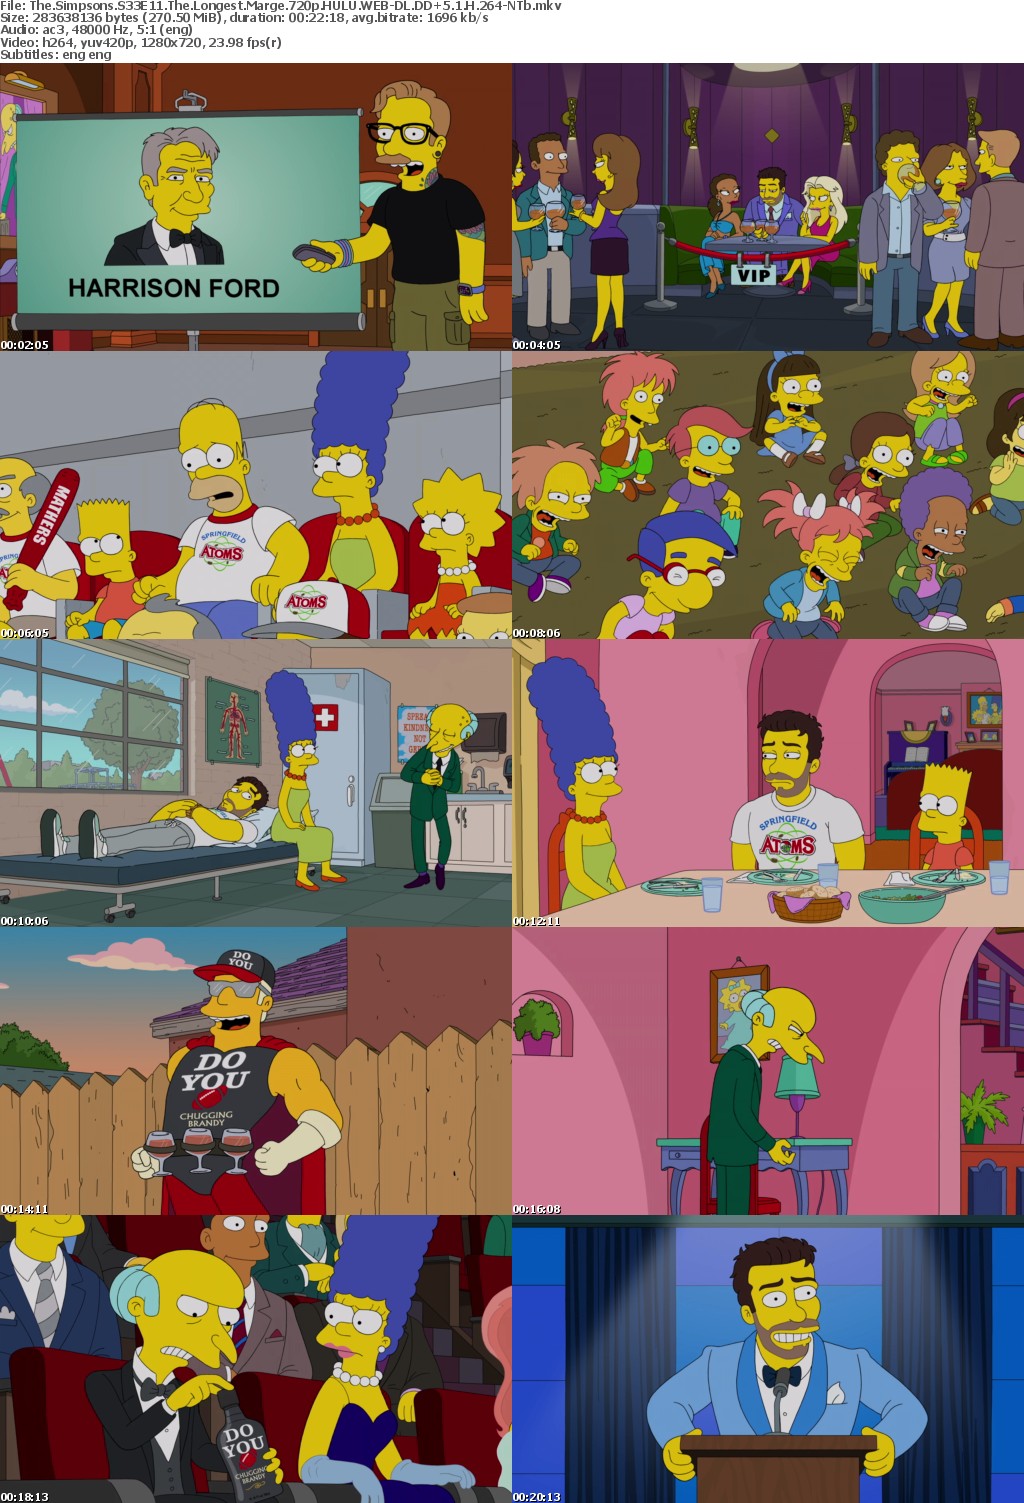 The Simpsons S33E11 The Longest Marge 720p HULU WEBRip DDP5 1 x264-NTb